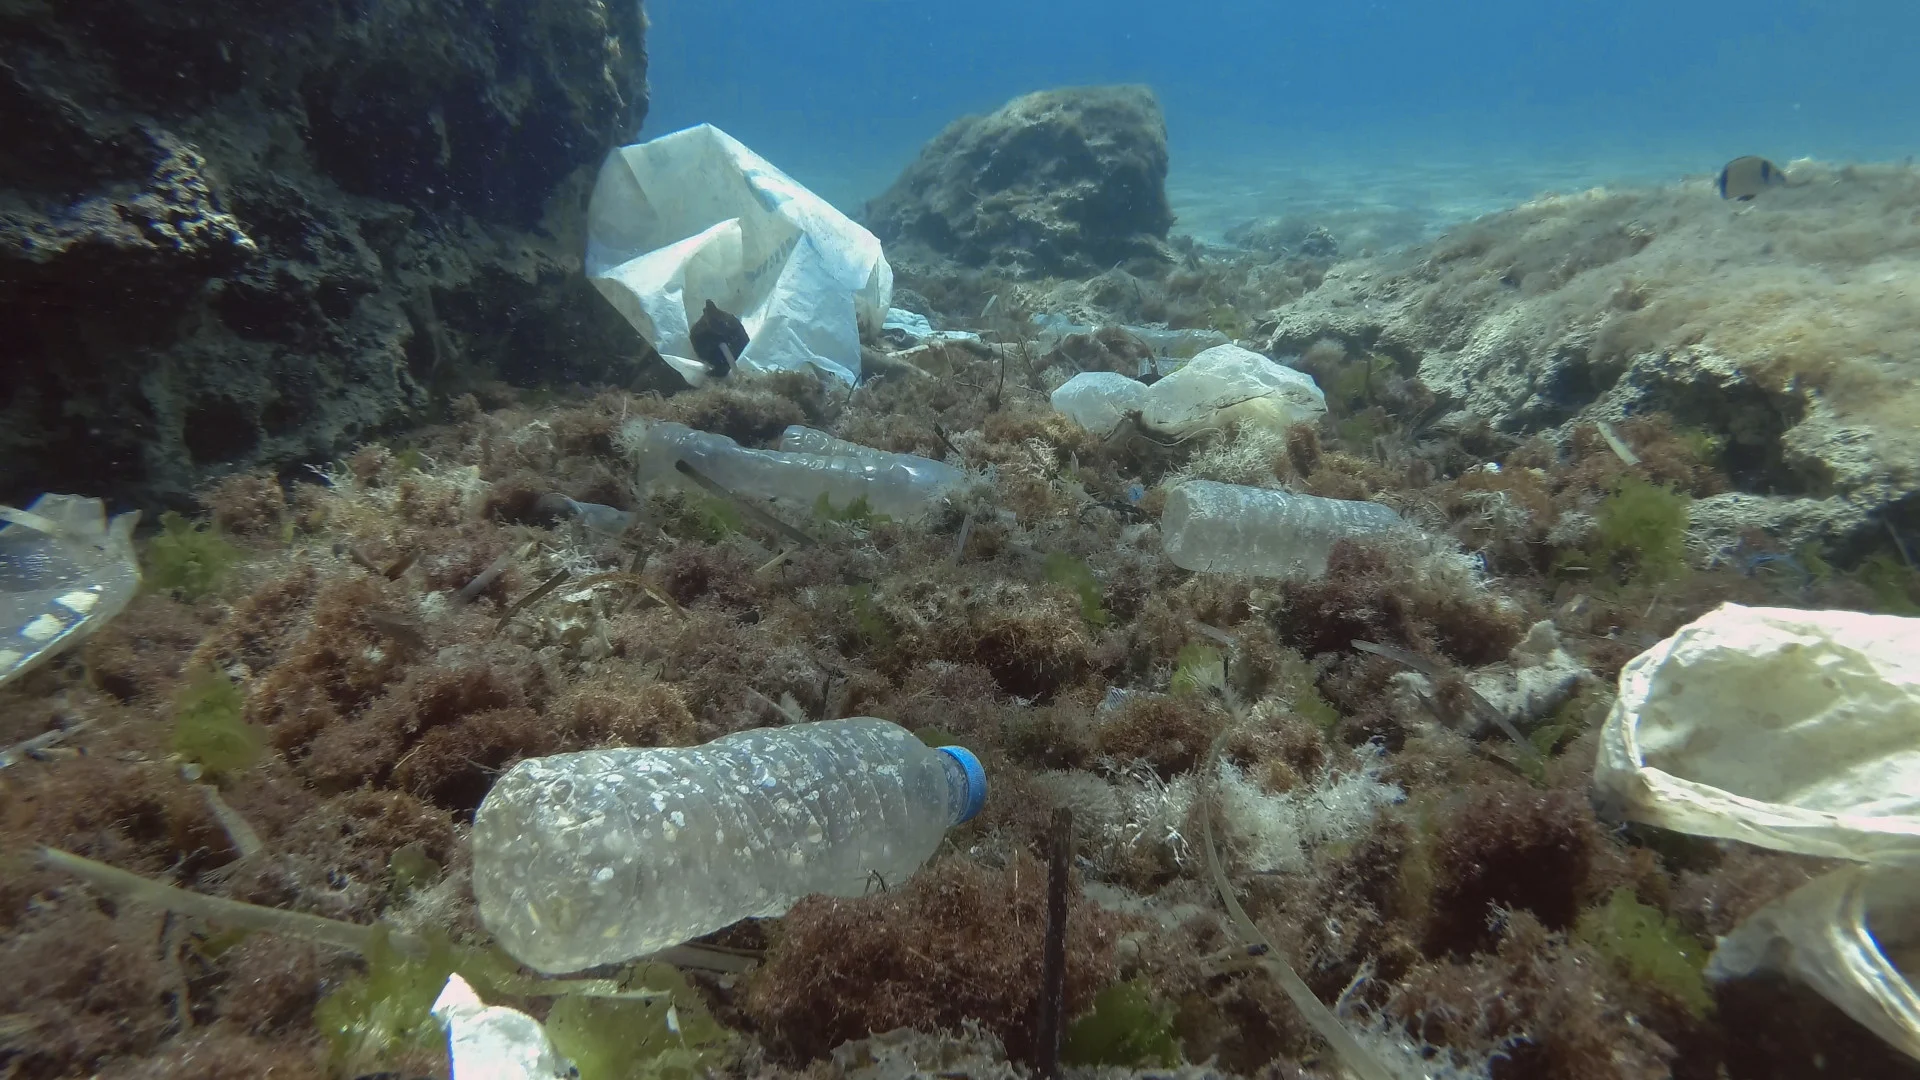 These ten plastic products account for 75% of all litter items in the ocean